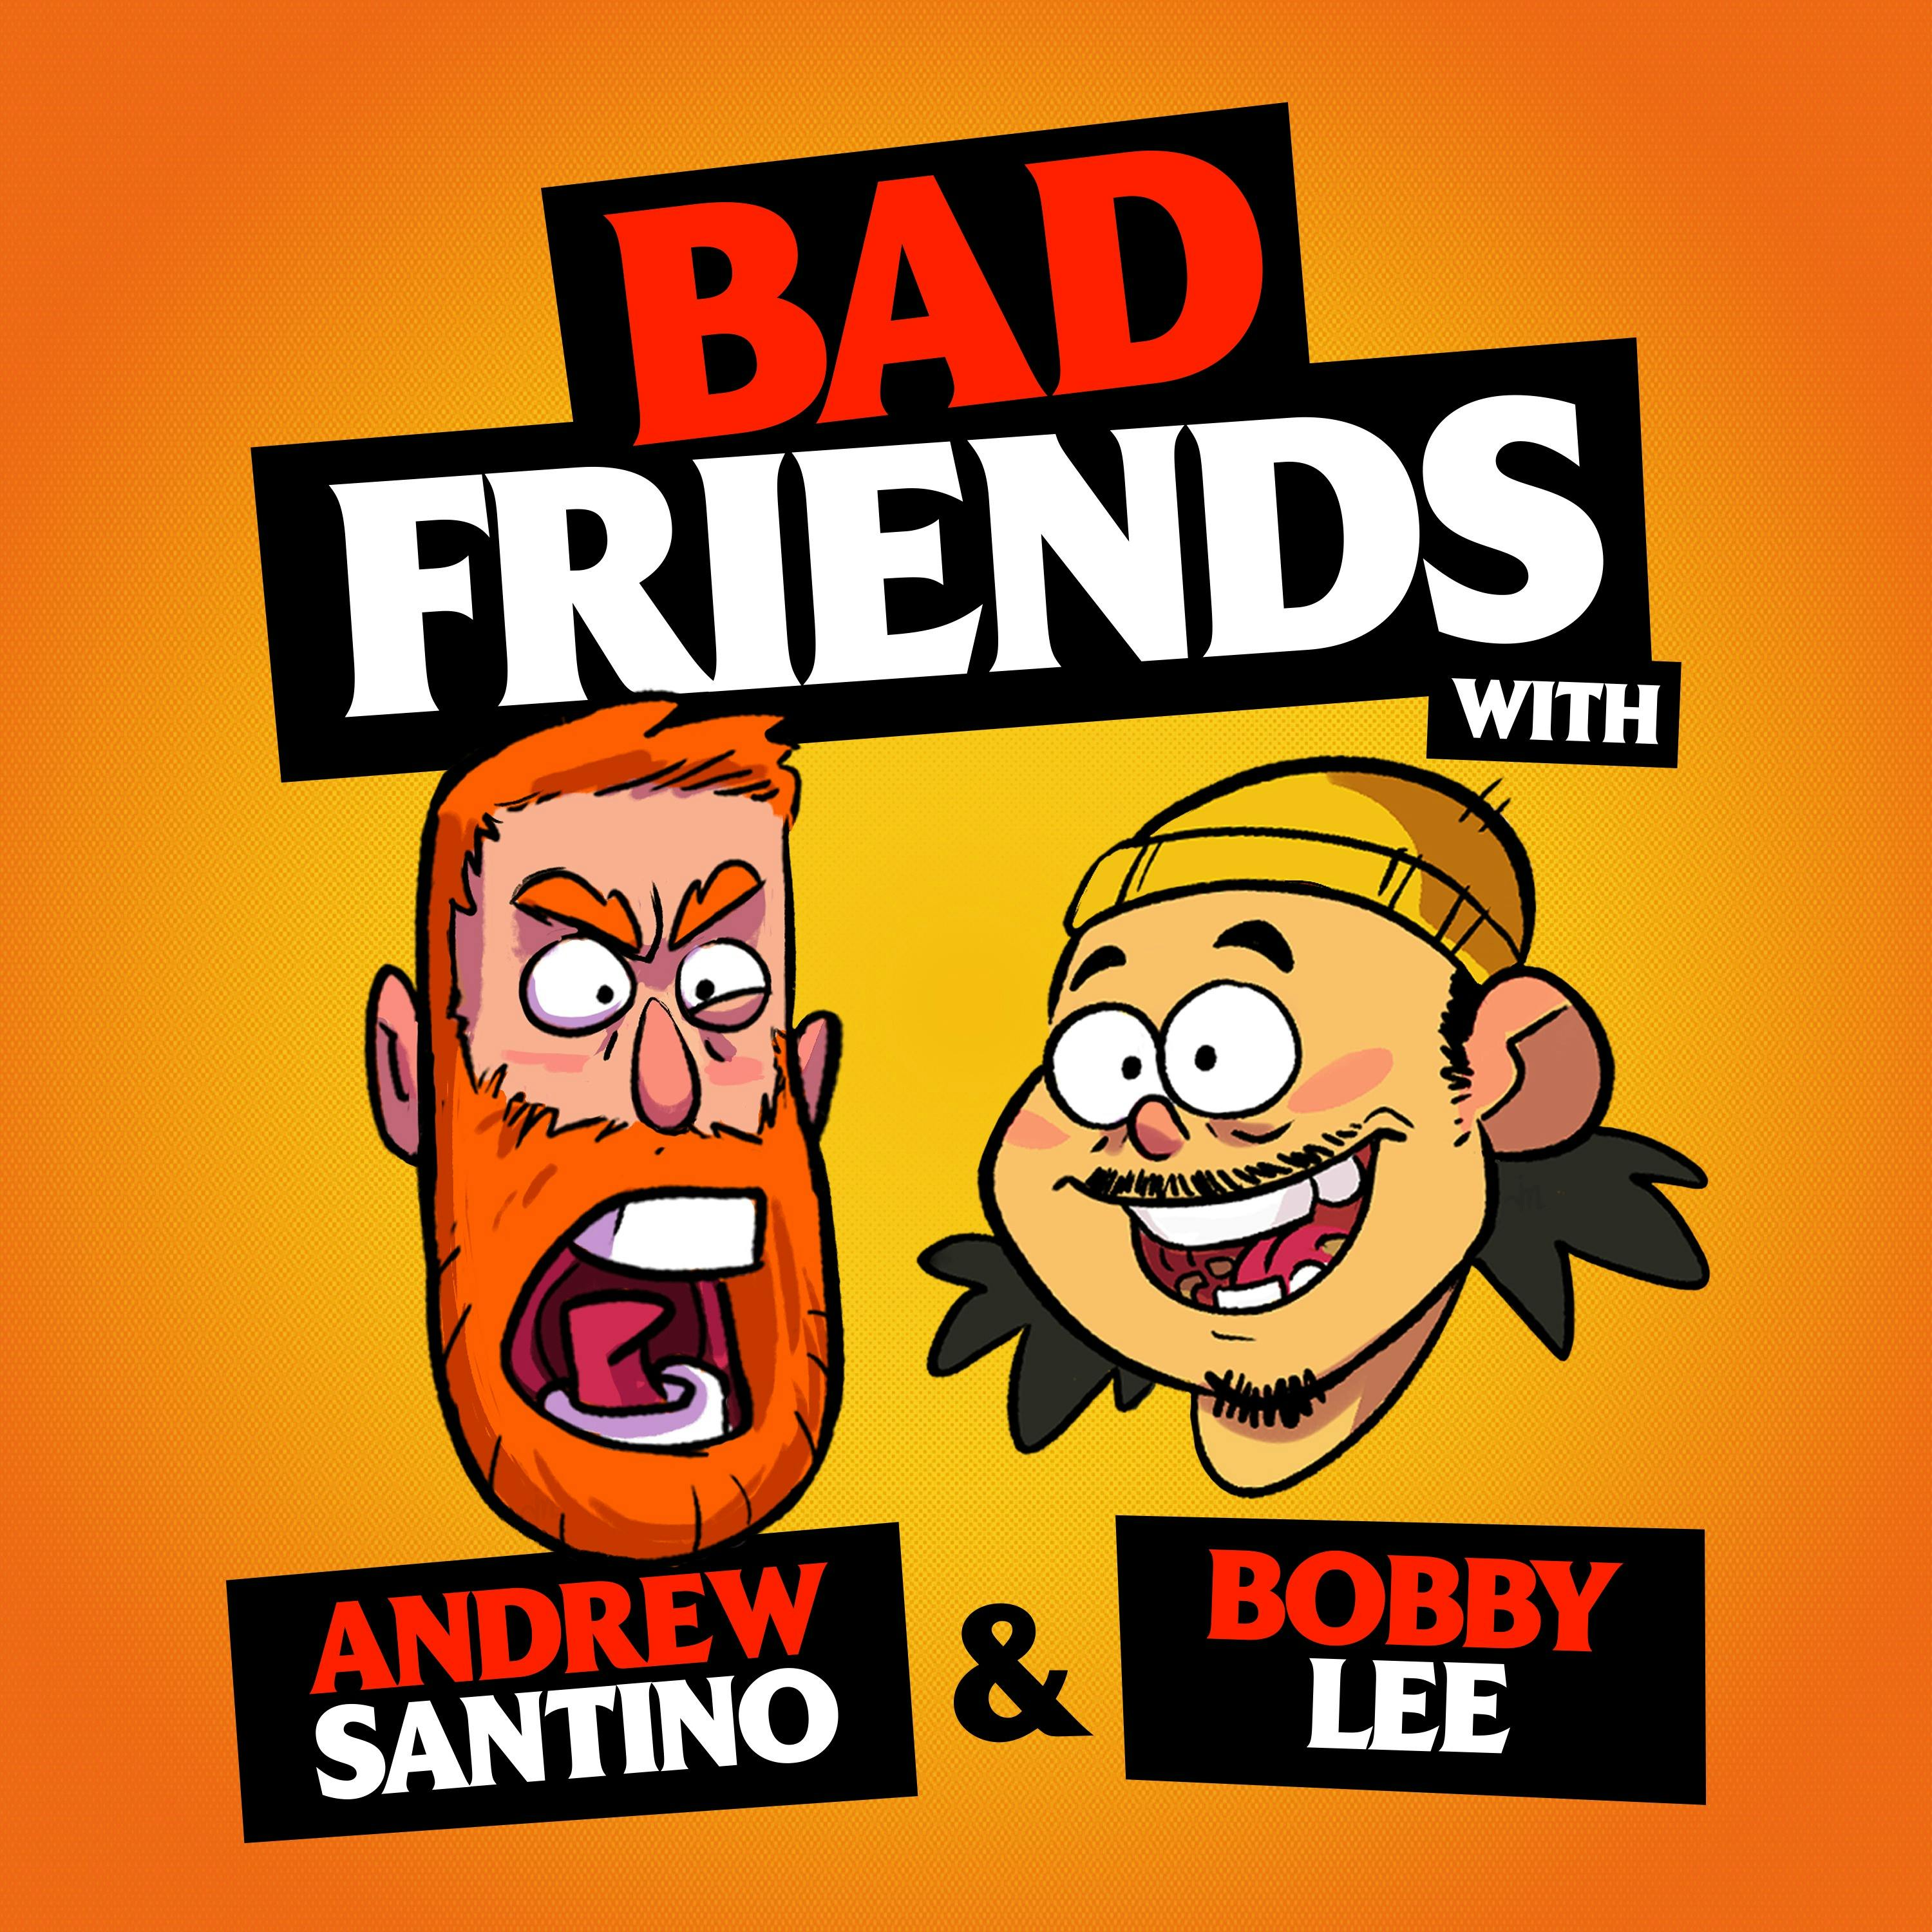 Korean Elvis & Andrew Dahmer by Andrew Santino and Bobby Lee